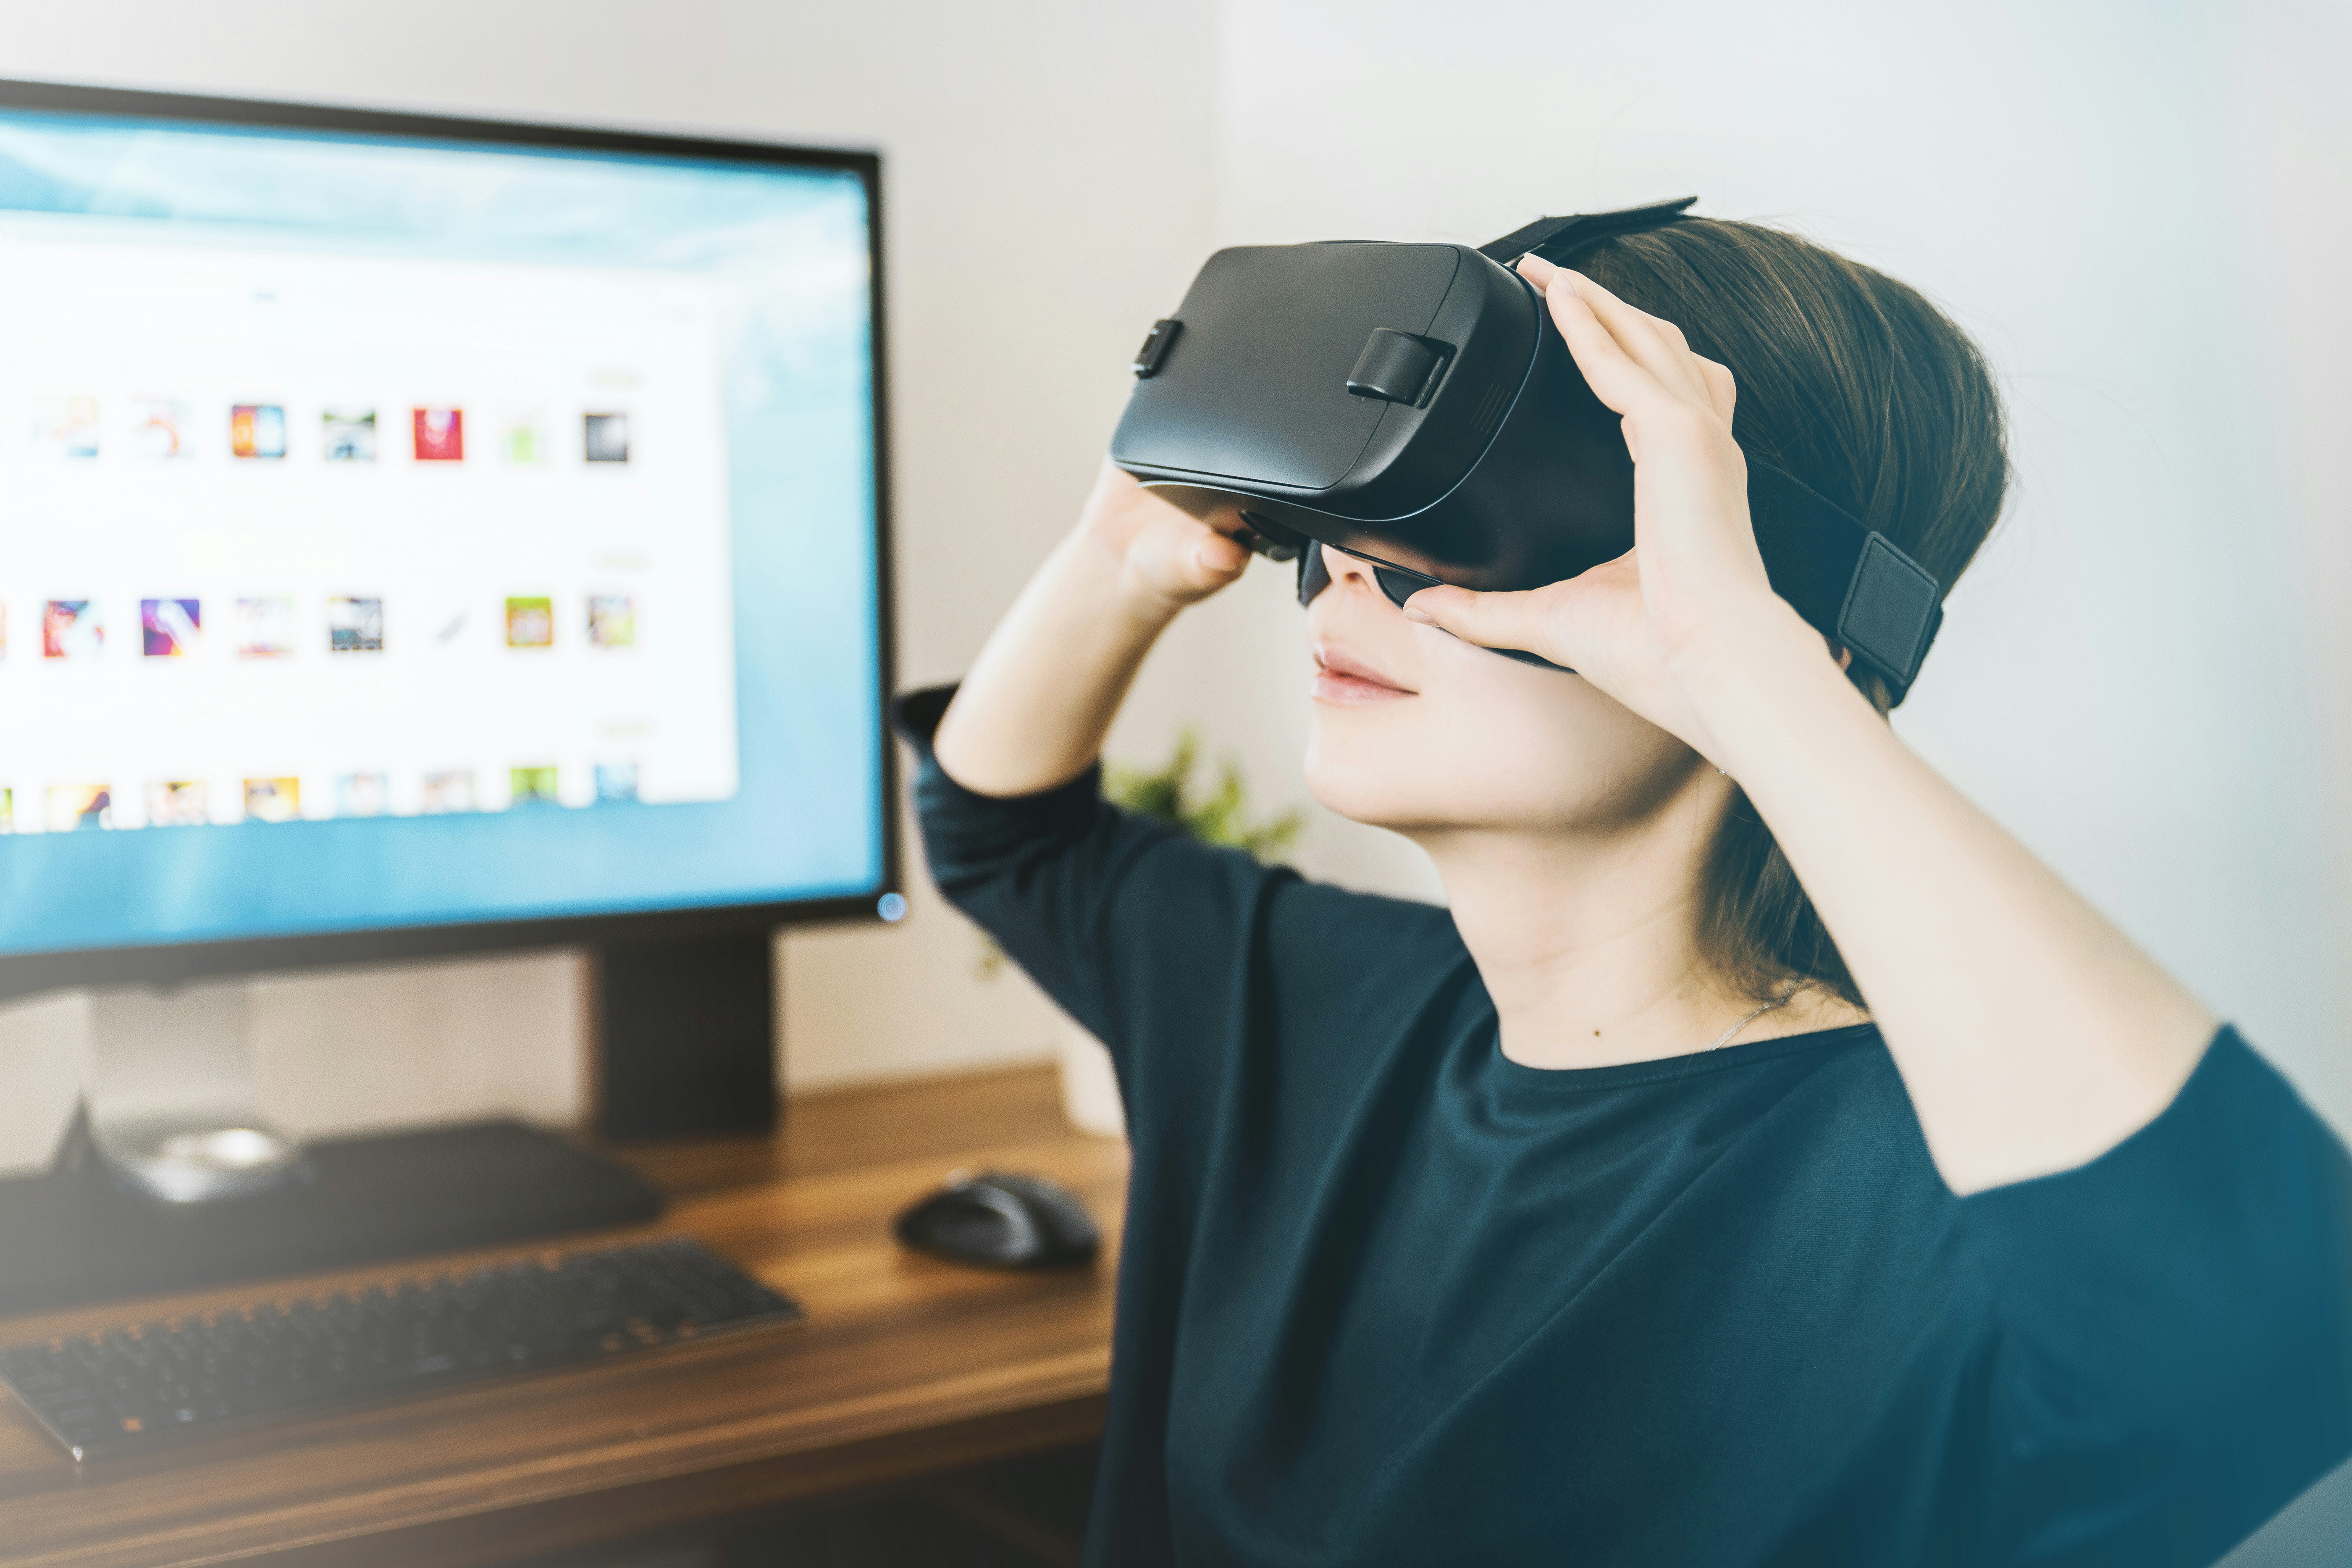 Is VR the Future of Education?